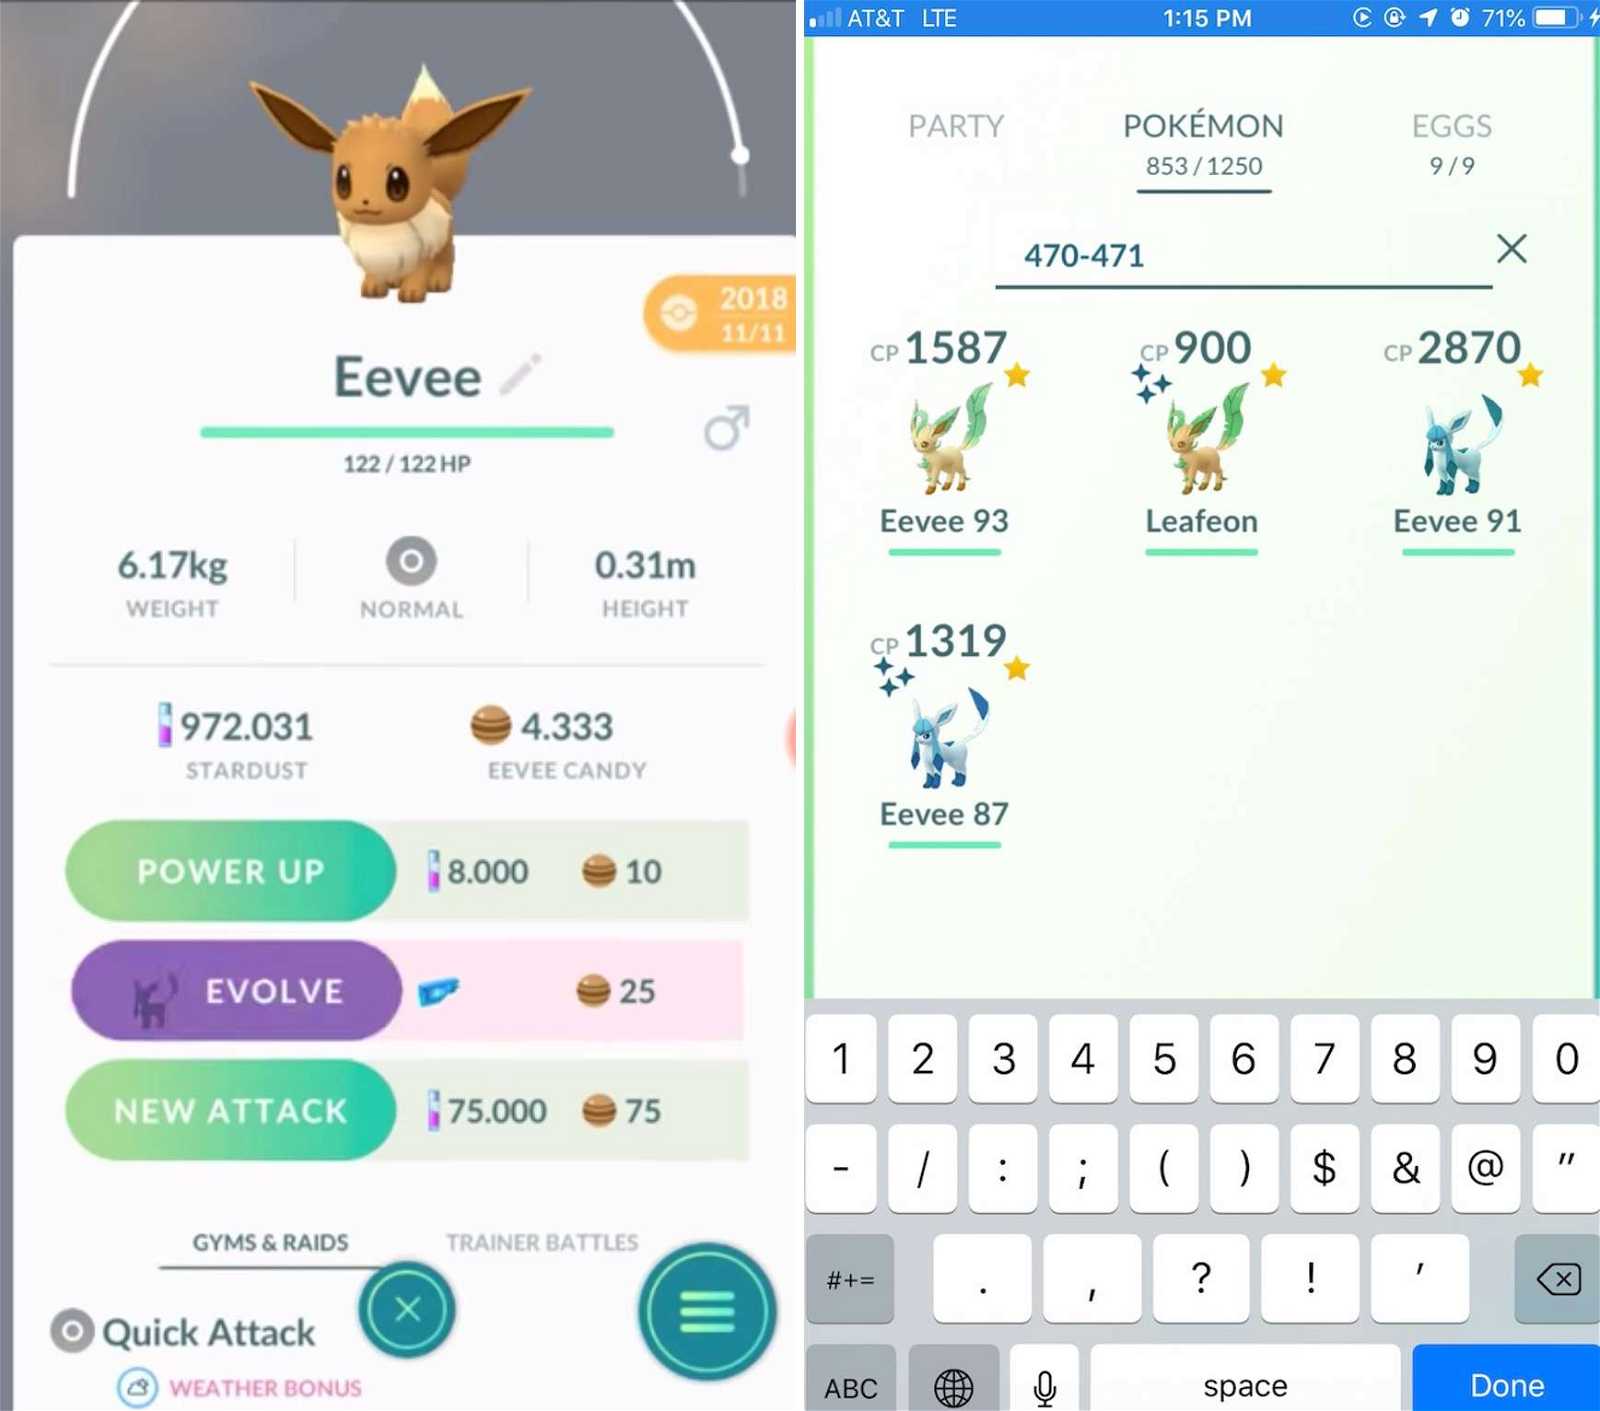 How to Evolve Eevee into Glaceon or Leafeon in PokÃ©mon Go